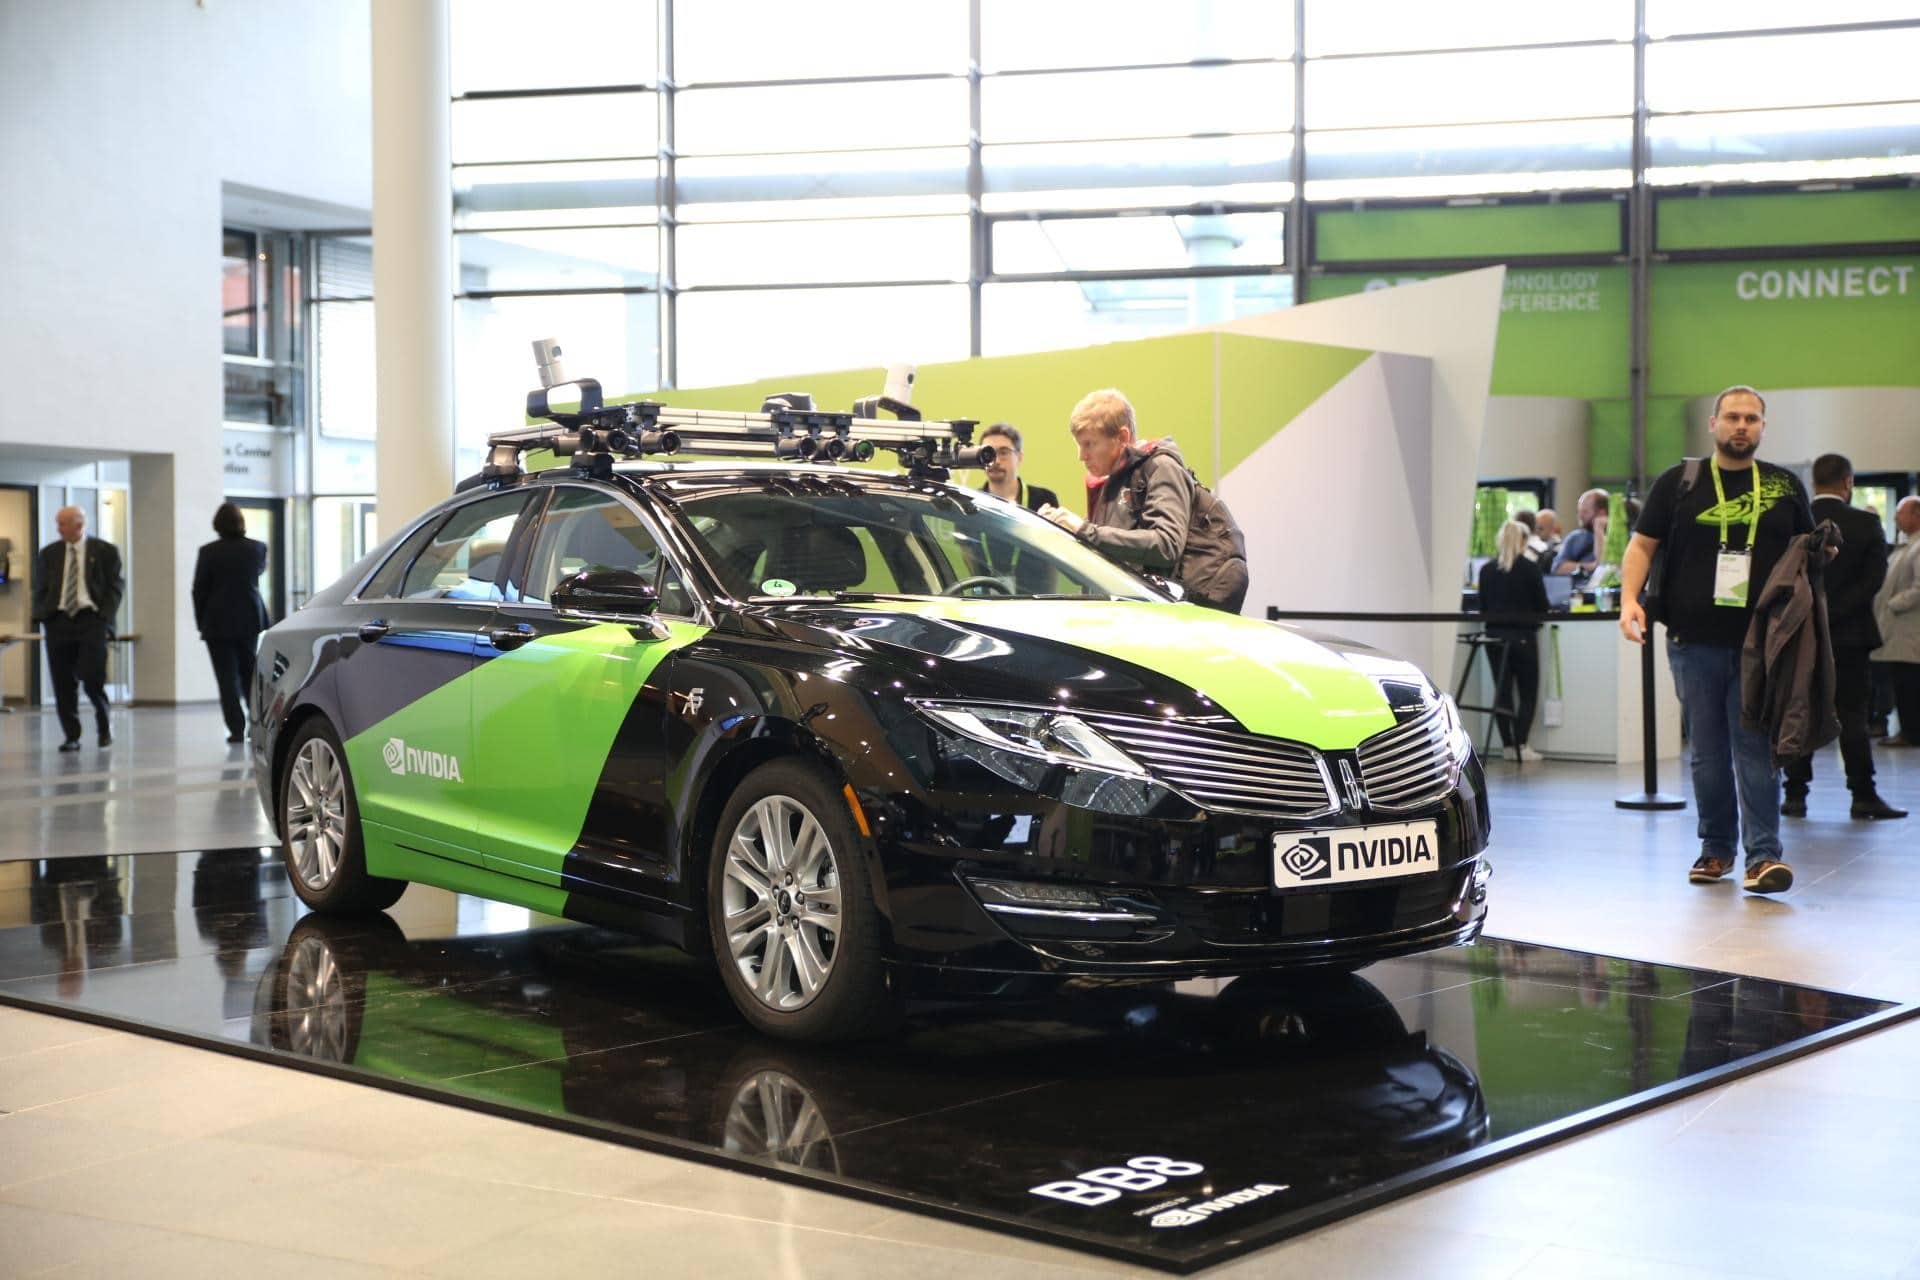 Where Cars Are the Stars: NVIDIA AI-Powered Vehicles Dazzle at GTC Europe | The ...1920 x 1280